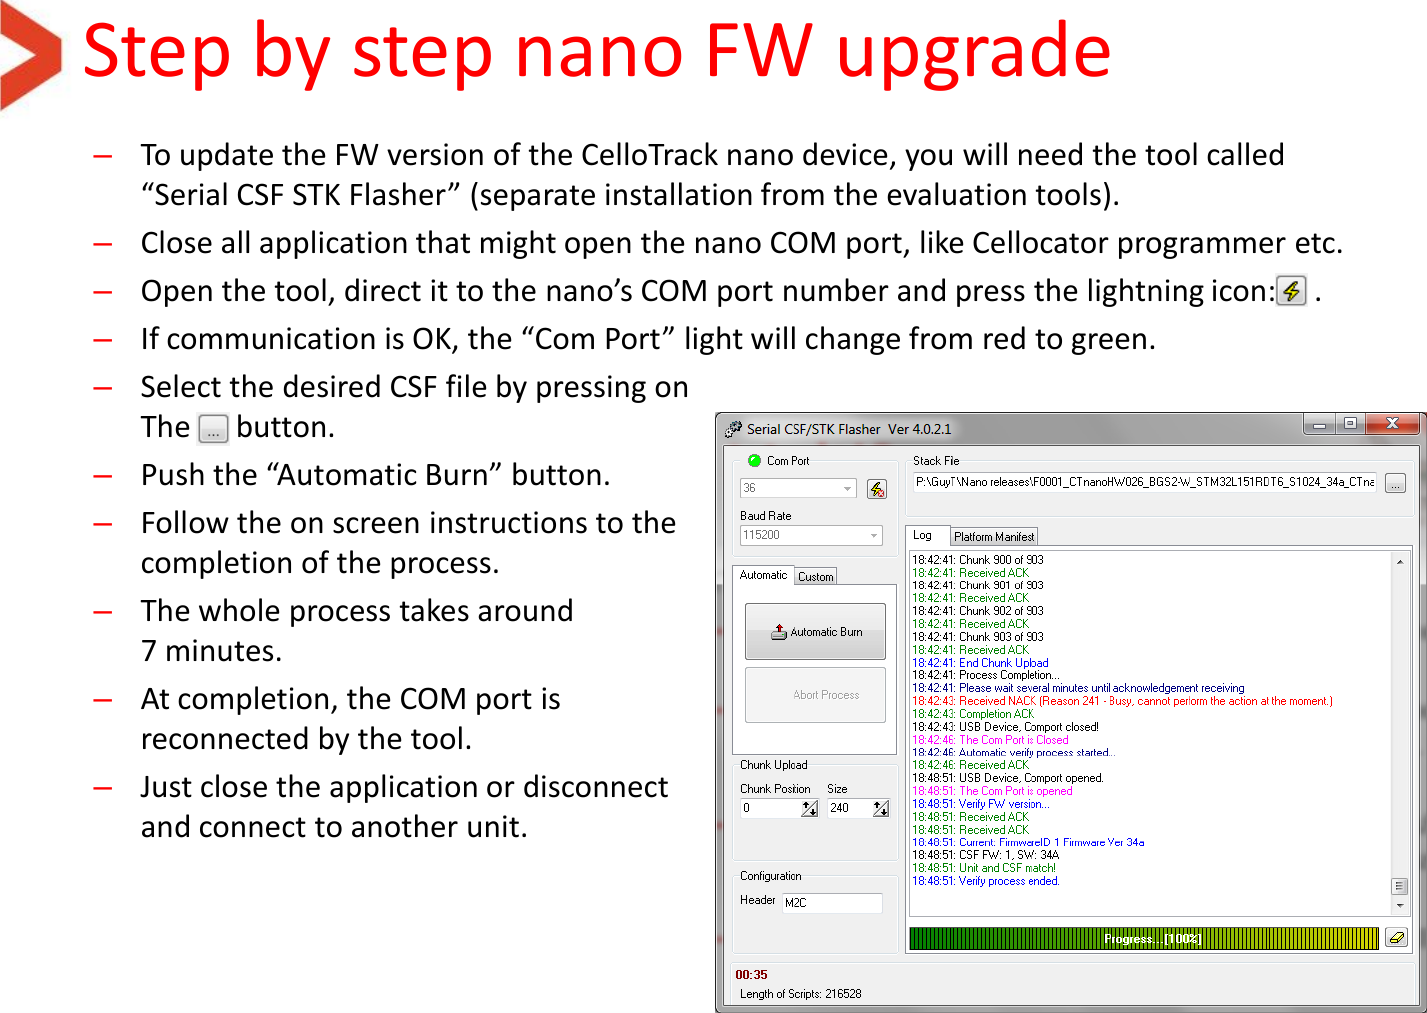 Step by step nano FW upgrade –To update the FW version of the CelloTrack nano device, you will need the tool called “Serial CSF STK Flasher” (separate installation from the evaluation tools). –Close all application that might open the nano COM port, like Cellocator programmer etc. –Open the tool, direct it to the nano’s COM port number and press the lightning icon:     . –If communication is OK, the “Com Port” light will change from red to green. –Select the desired CSF file by pressing on The      button. –Push the “Automatic Burn” button. –Follow the on screen instructions to the completion of the process. –The whole process takes around 7 minutes. –At completion, the COM port is  reconnected by the tool. –Just close the application or disconnect and connect to another unit. 